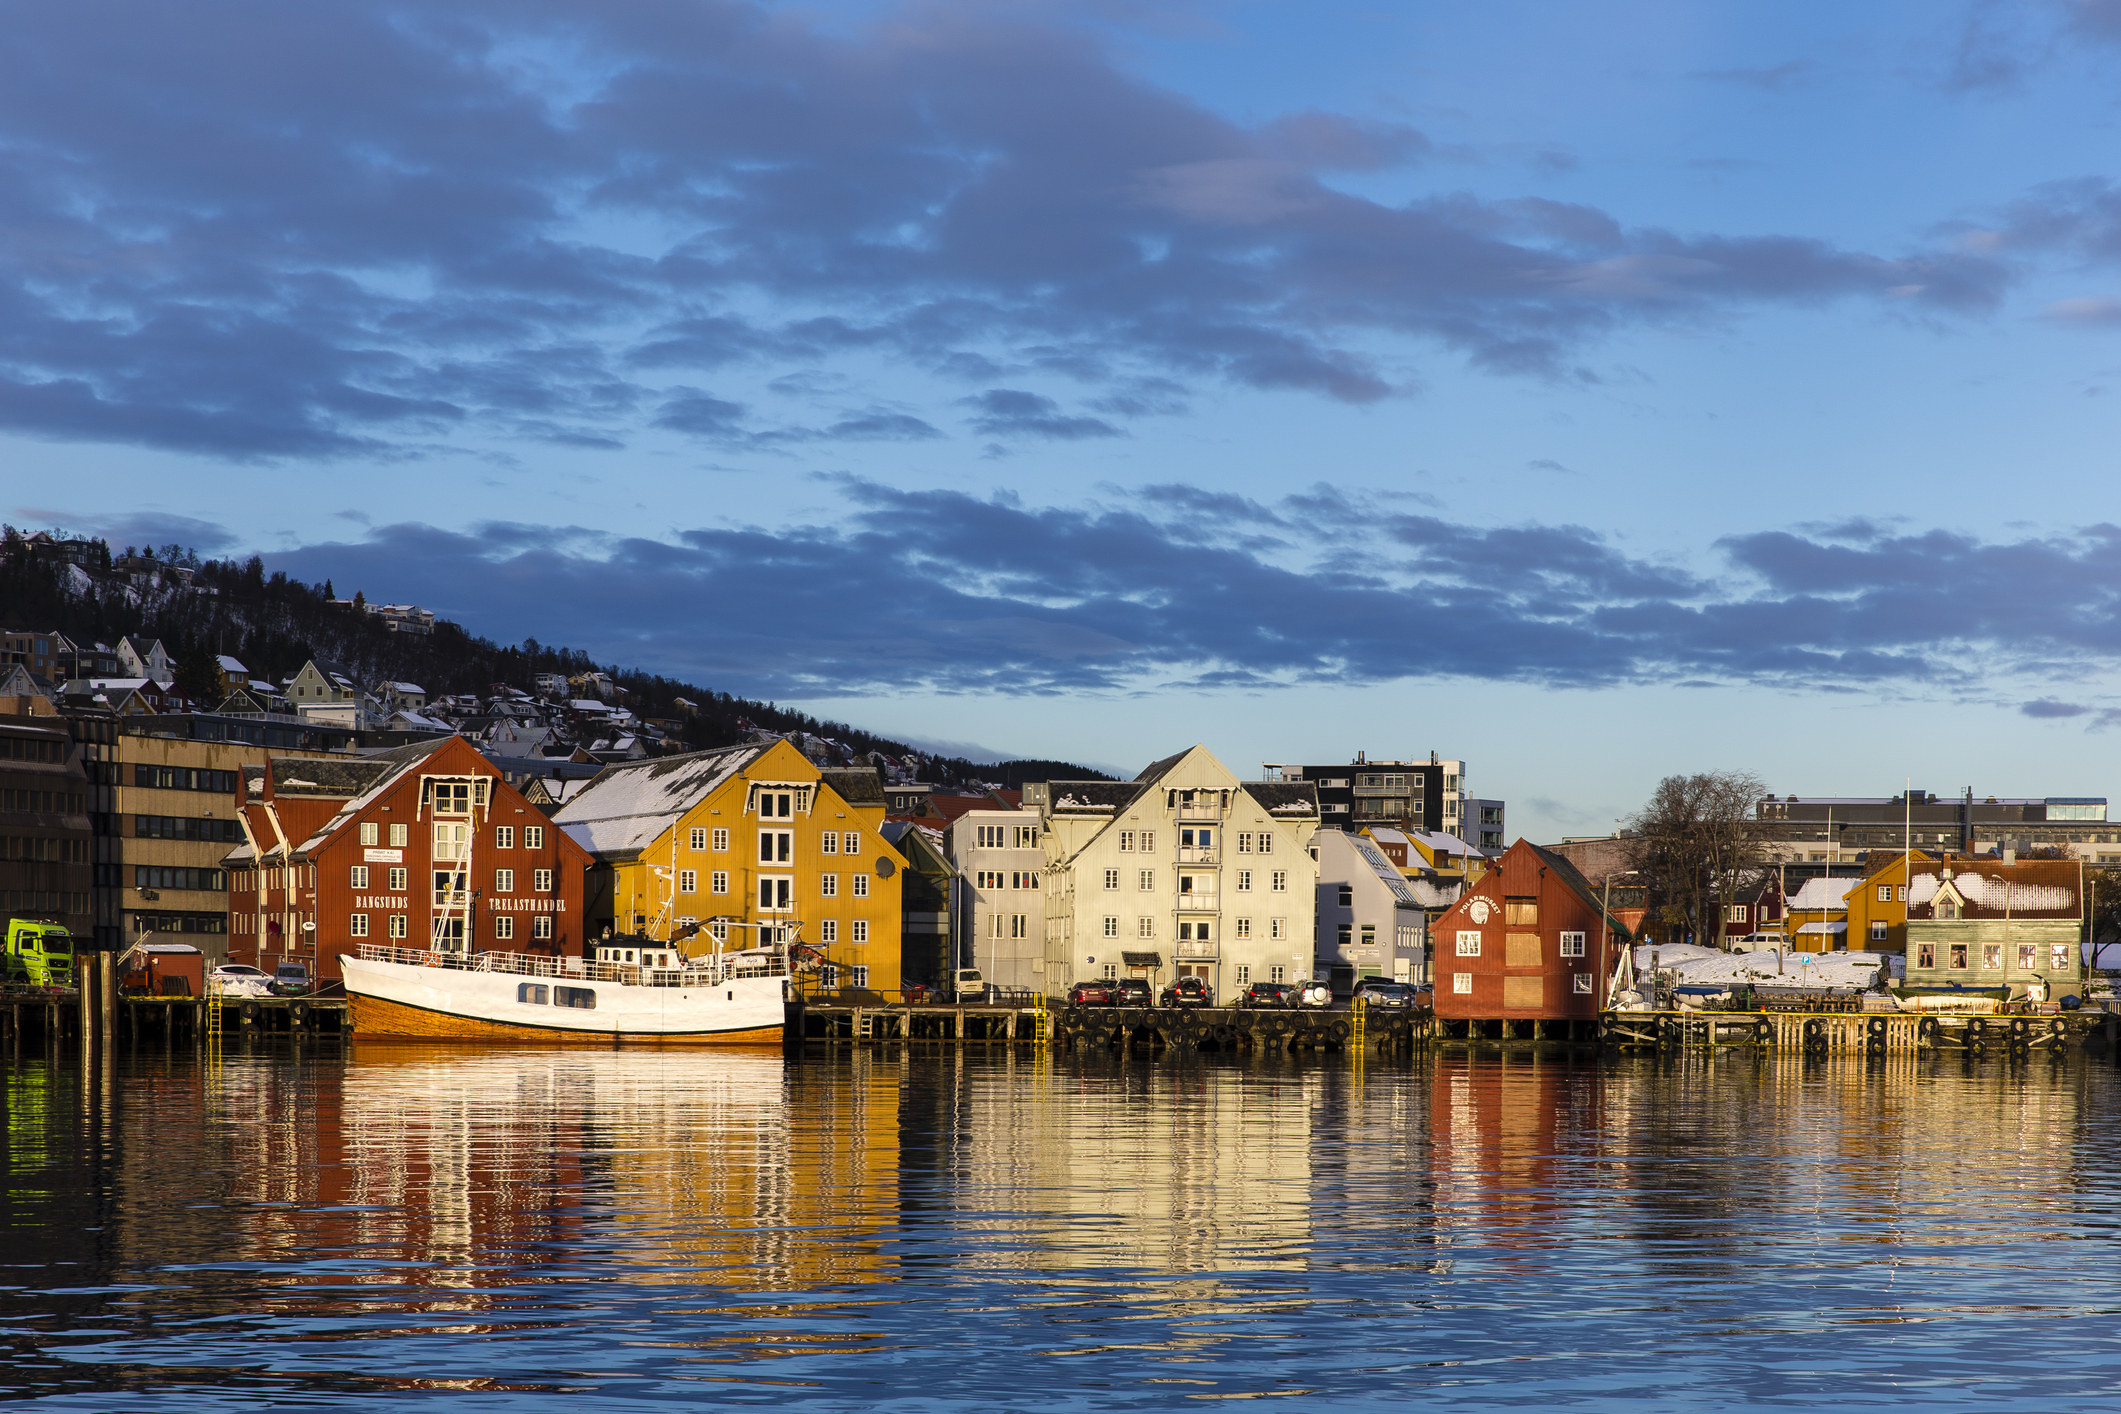 Colorful buildings on a harbor in Norway.